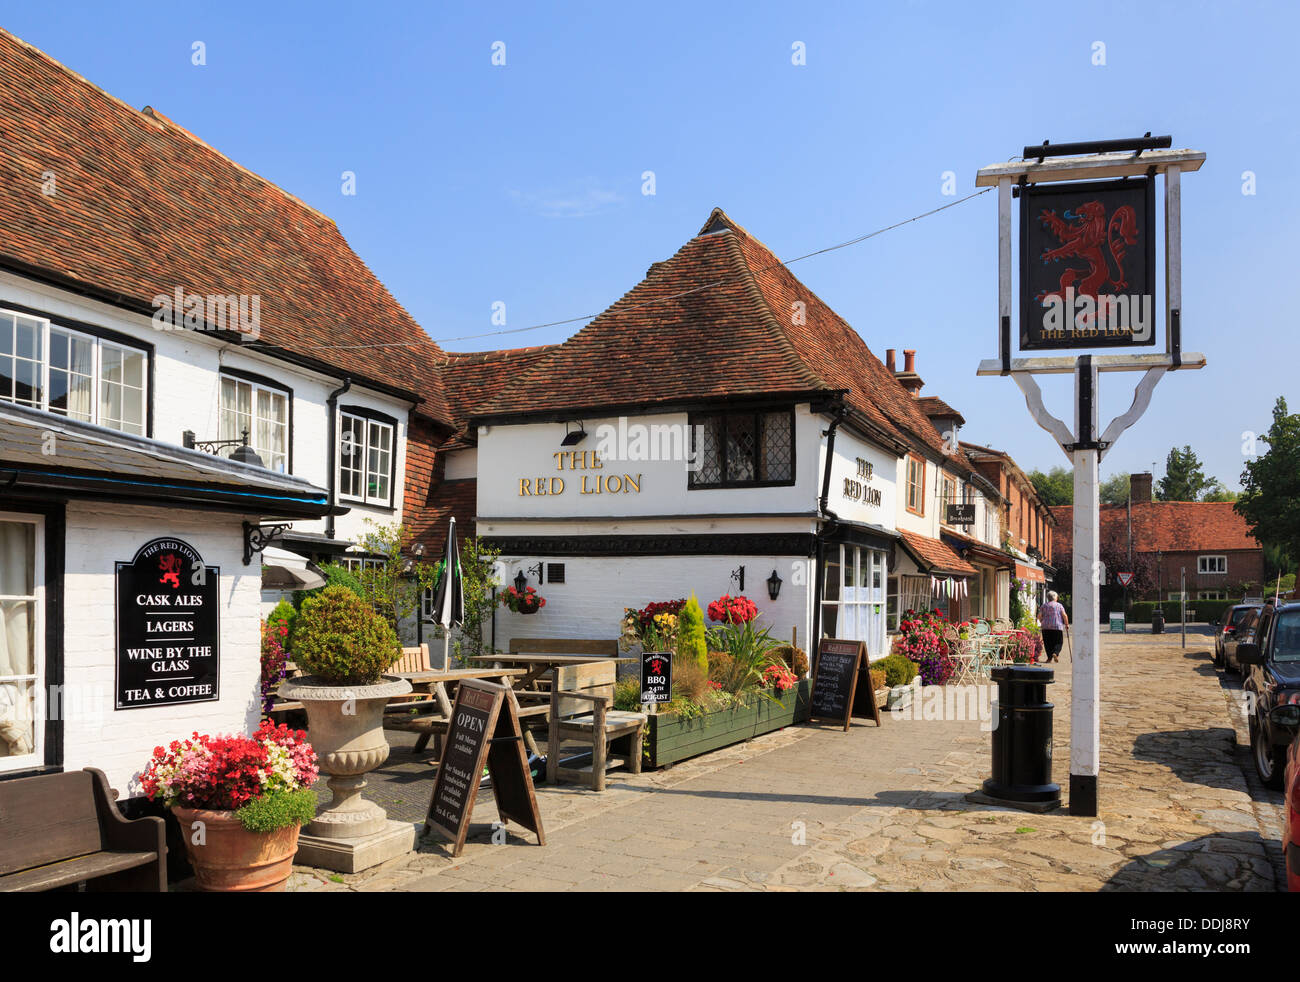 The Red Lion village pub and sign in Biddenden, Kent, England, UK, Britain Stock Photo